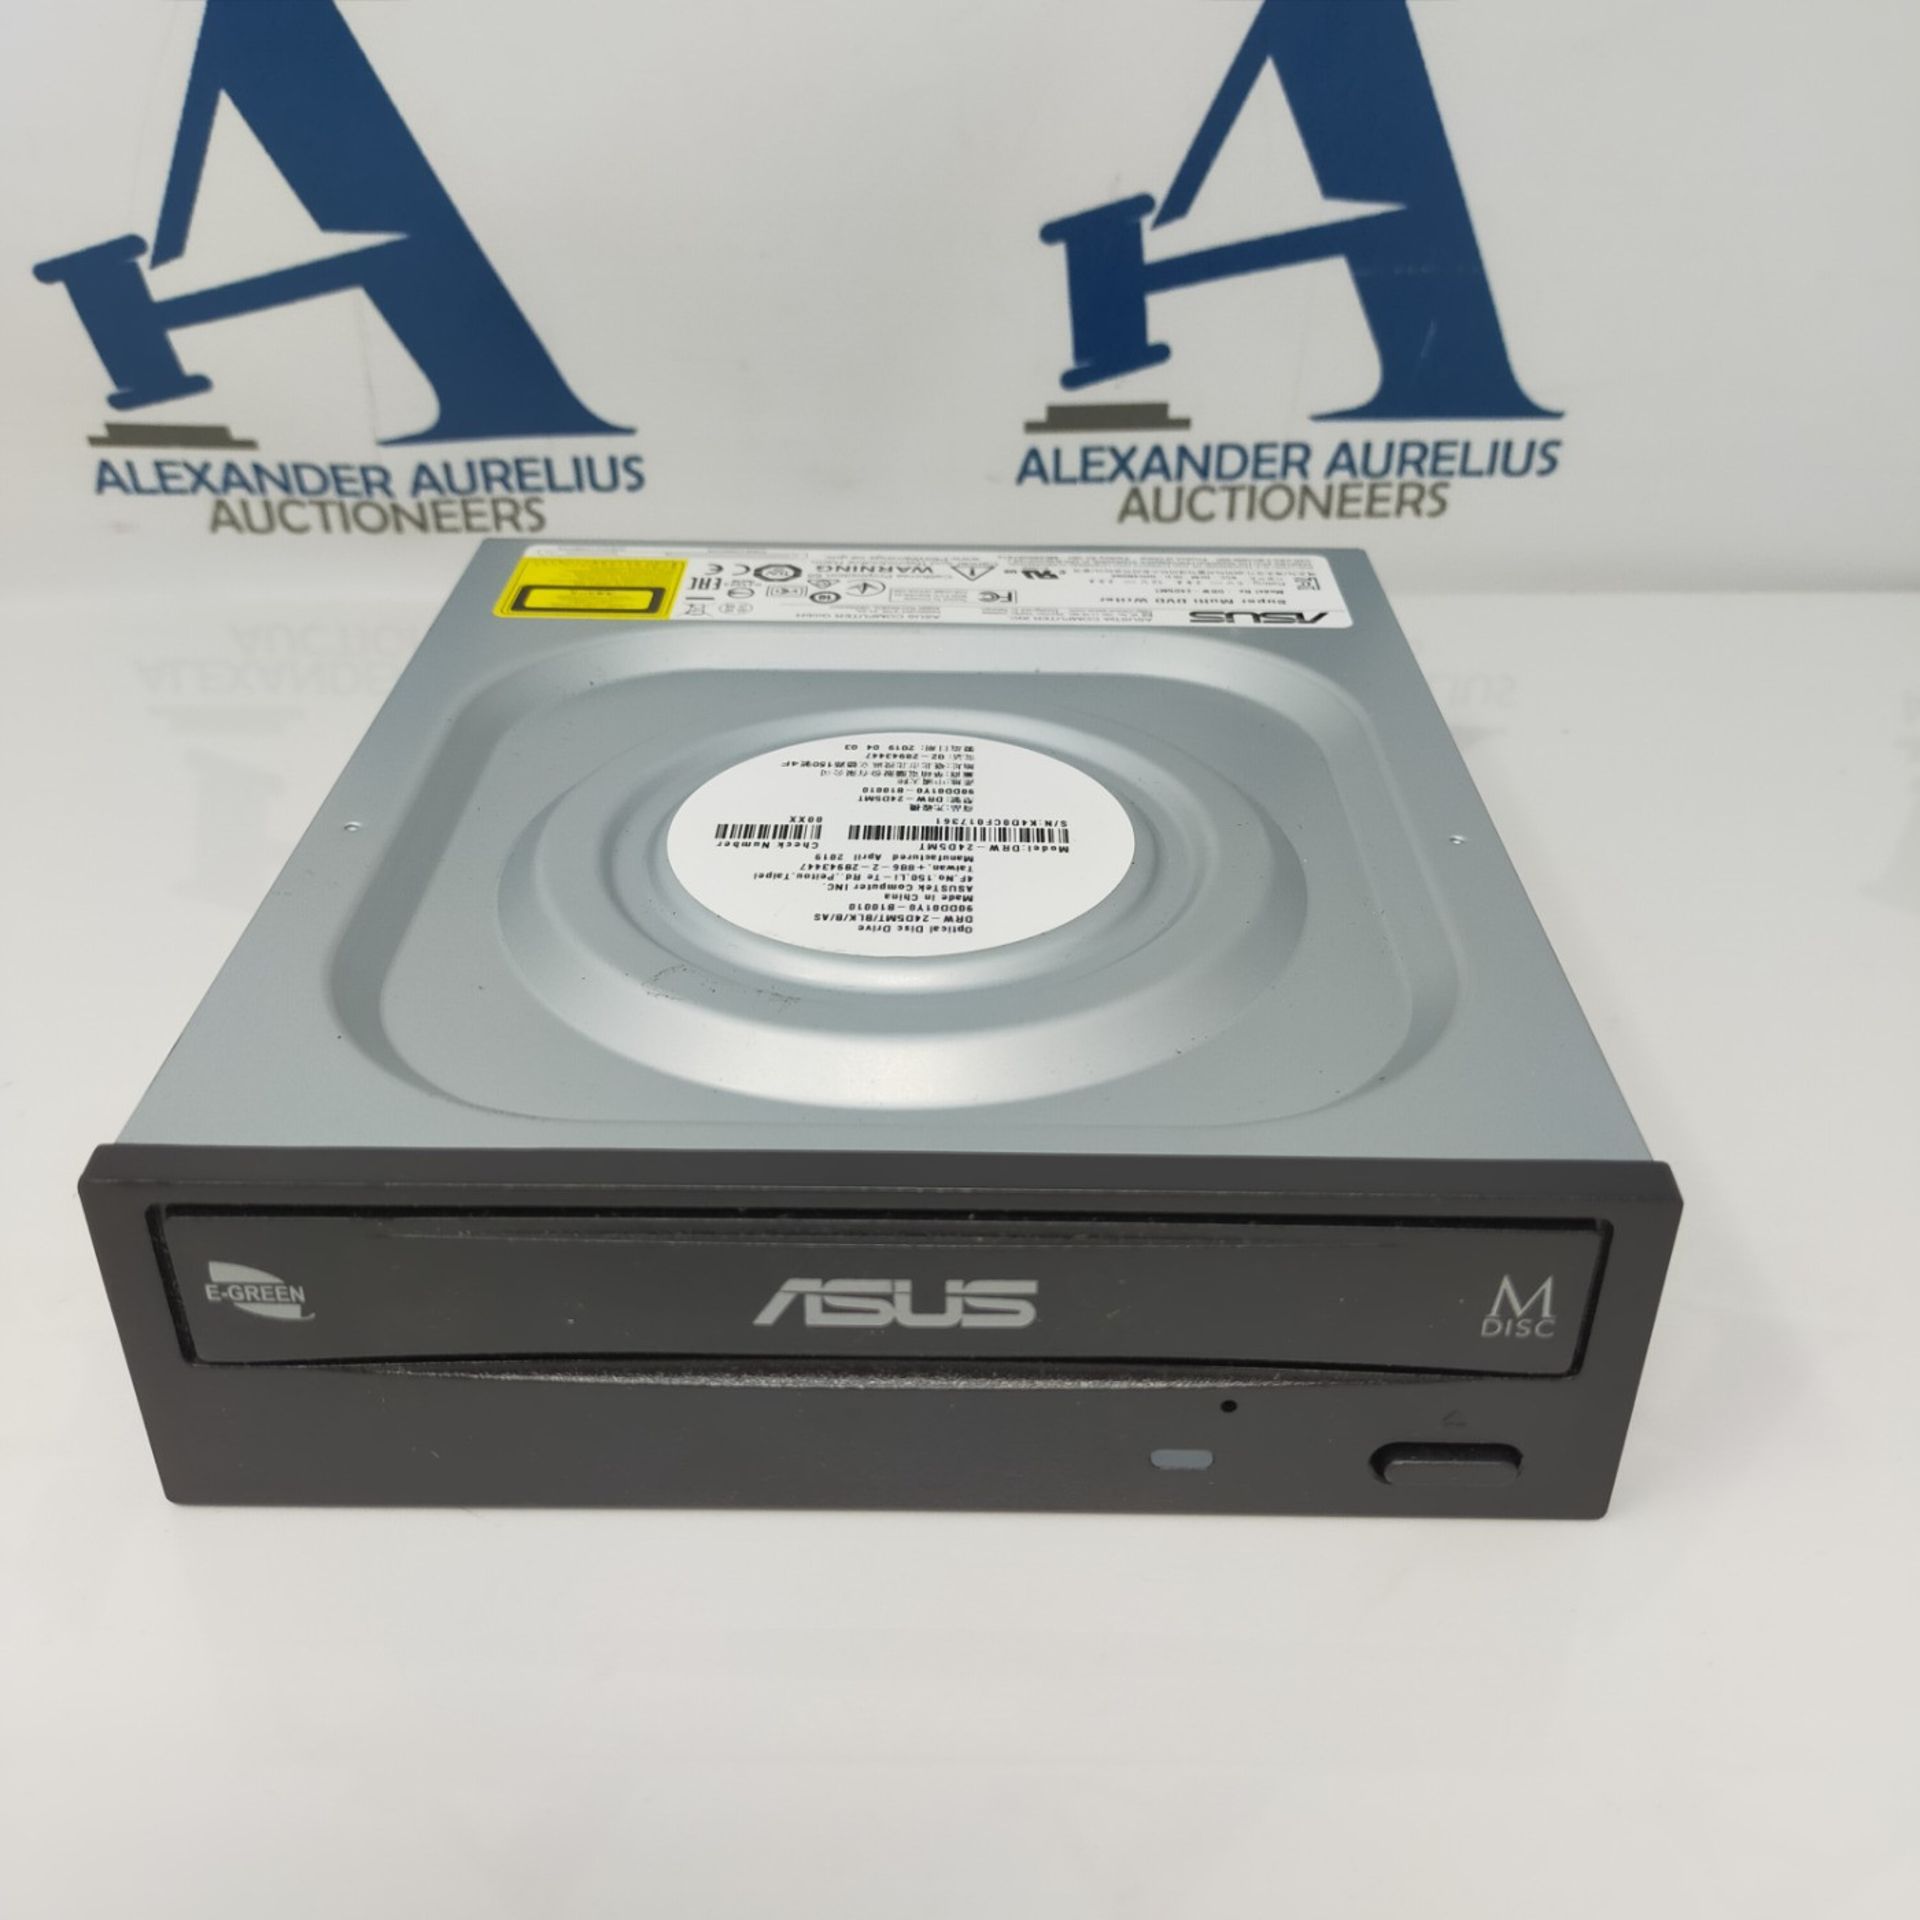 ASUS DRW-24D5MT 24X DVD writer, M-DISC support, Disc Encryption, Unlimited Webstorage( - Image 2 of 2